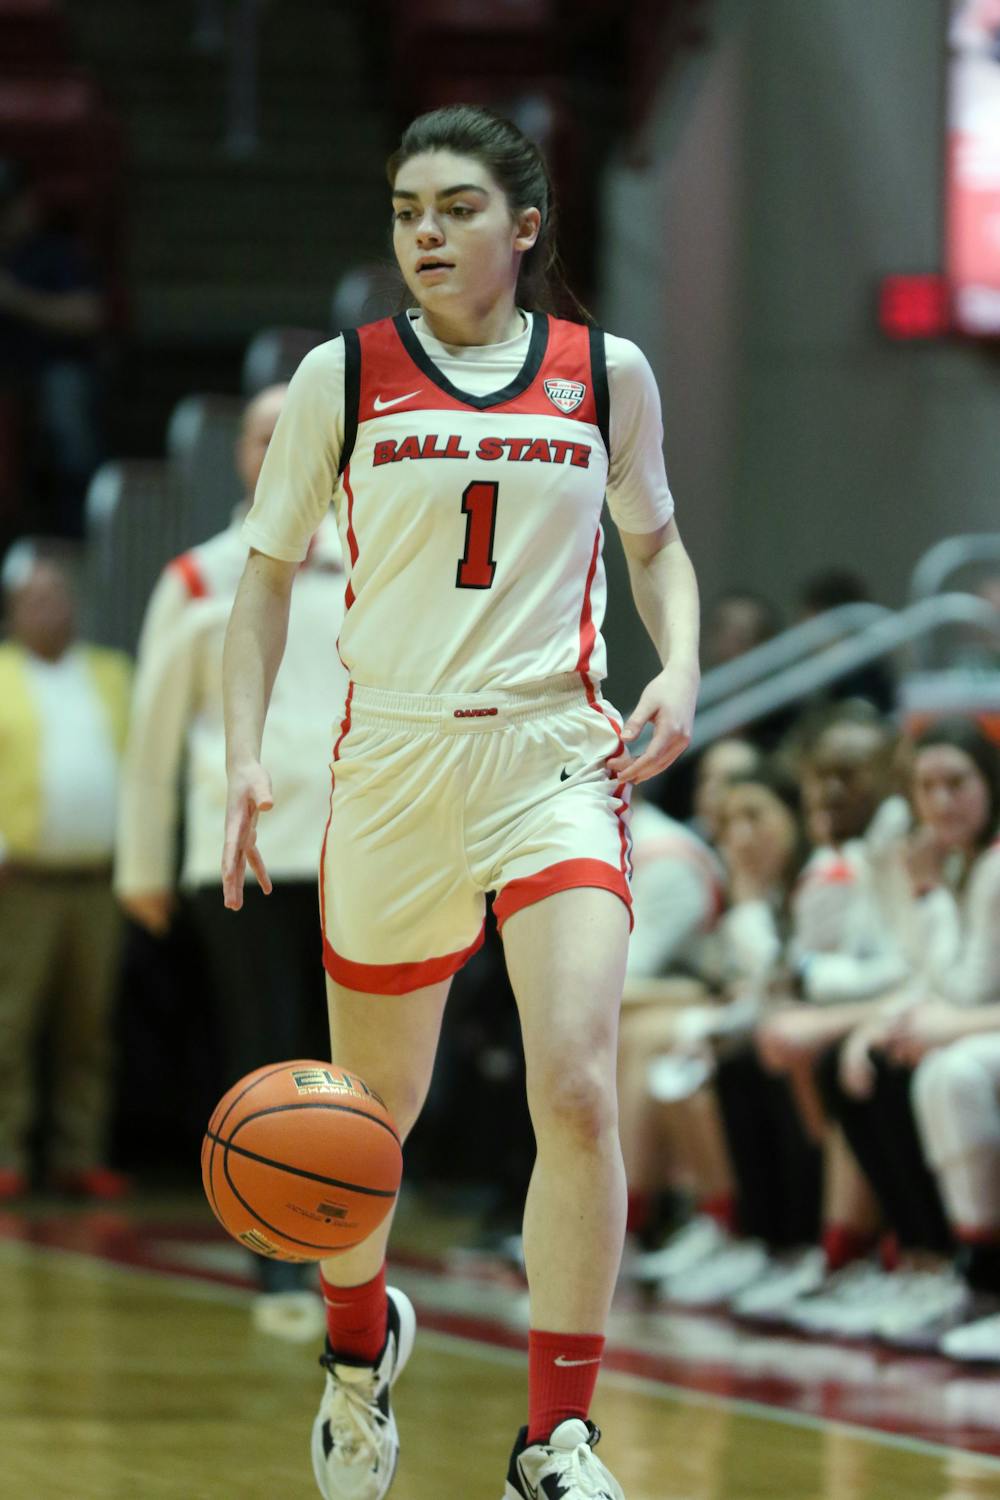 Hana Mühl’s journey from pro basketball overseas to NCAA basketball at Ball State